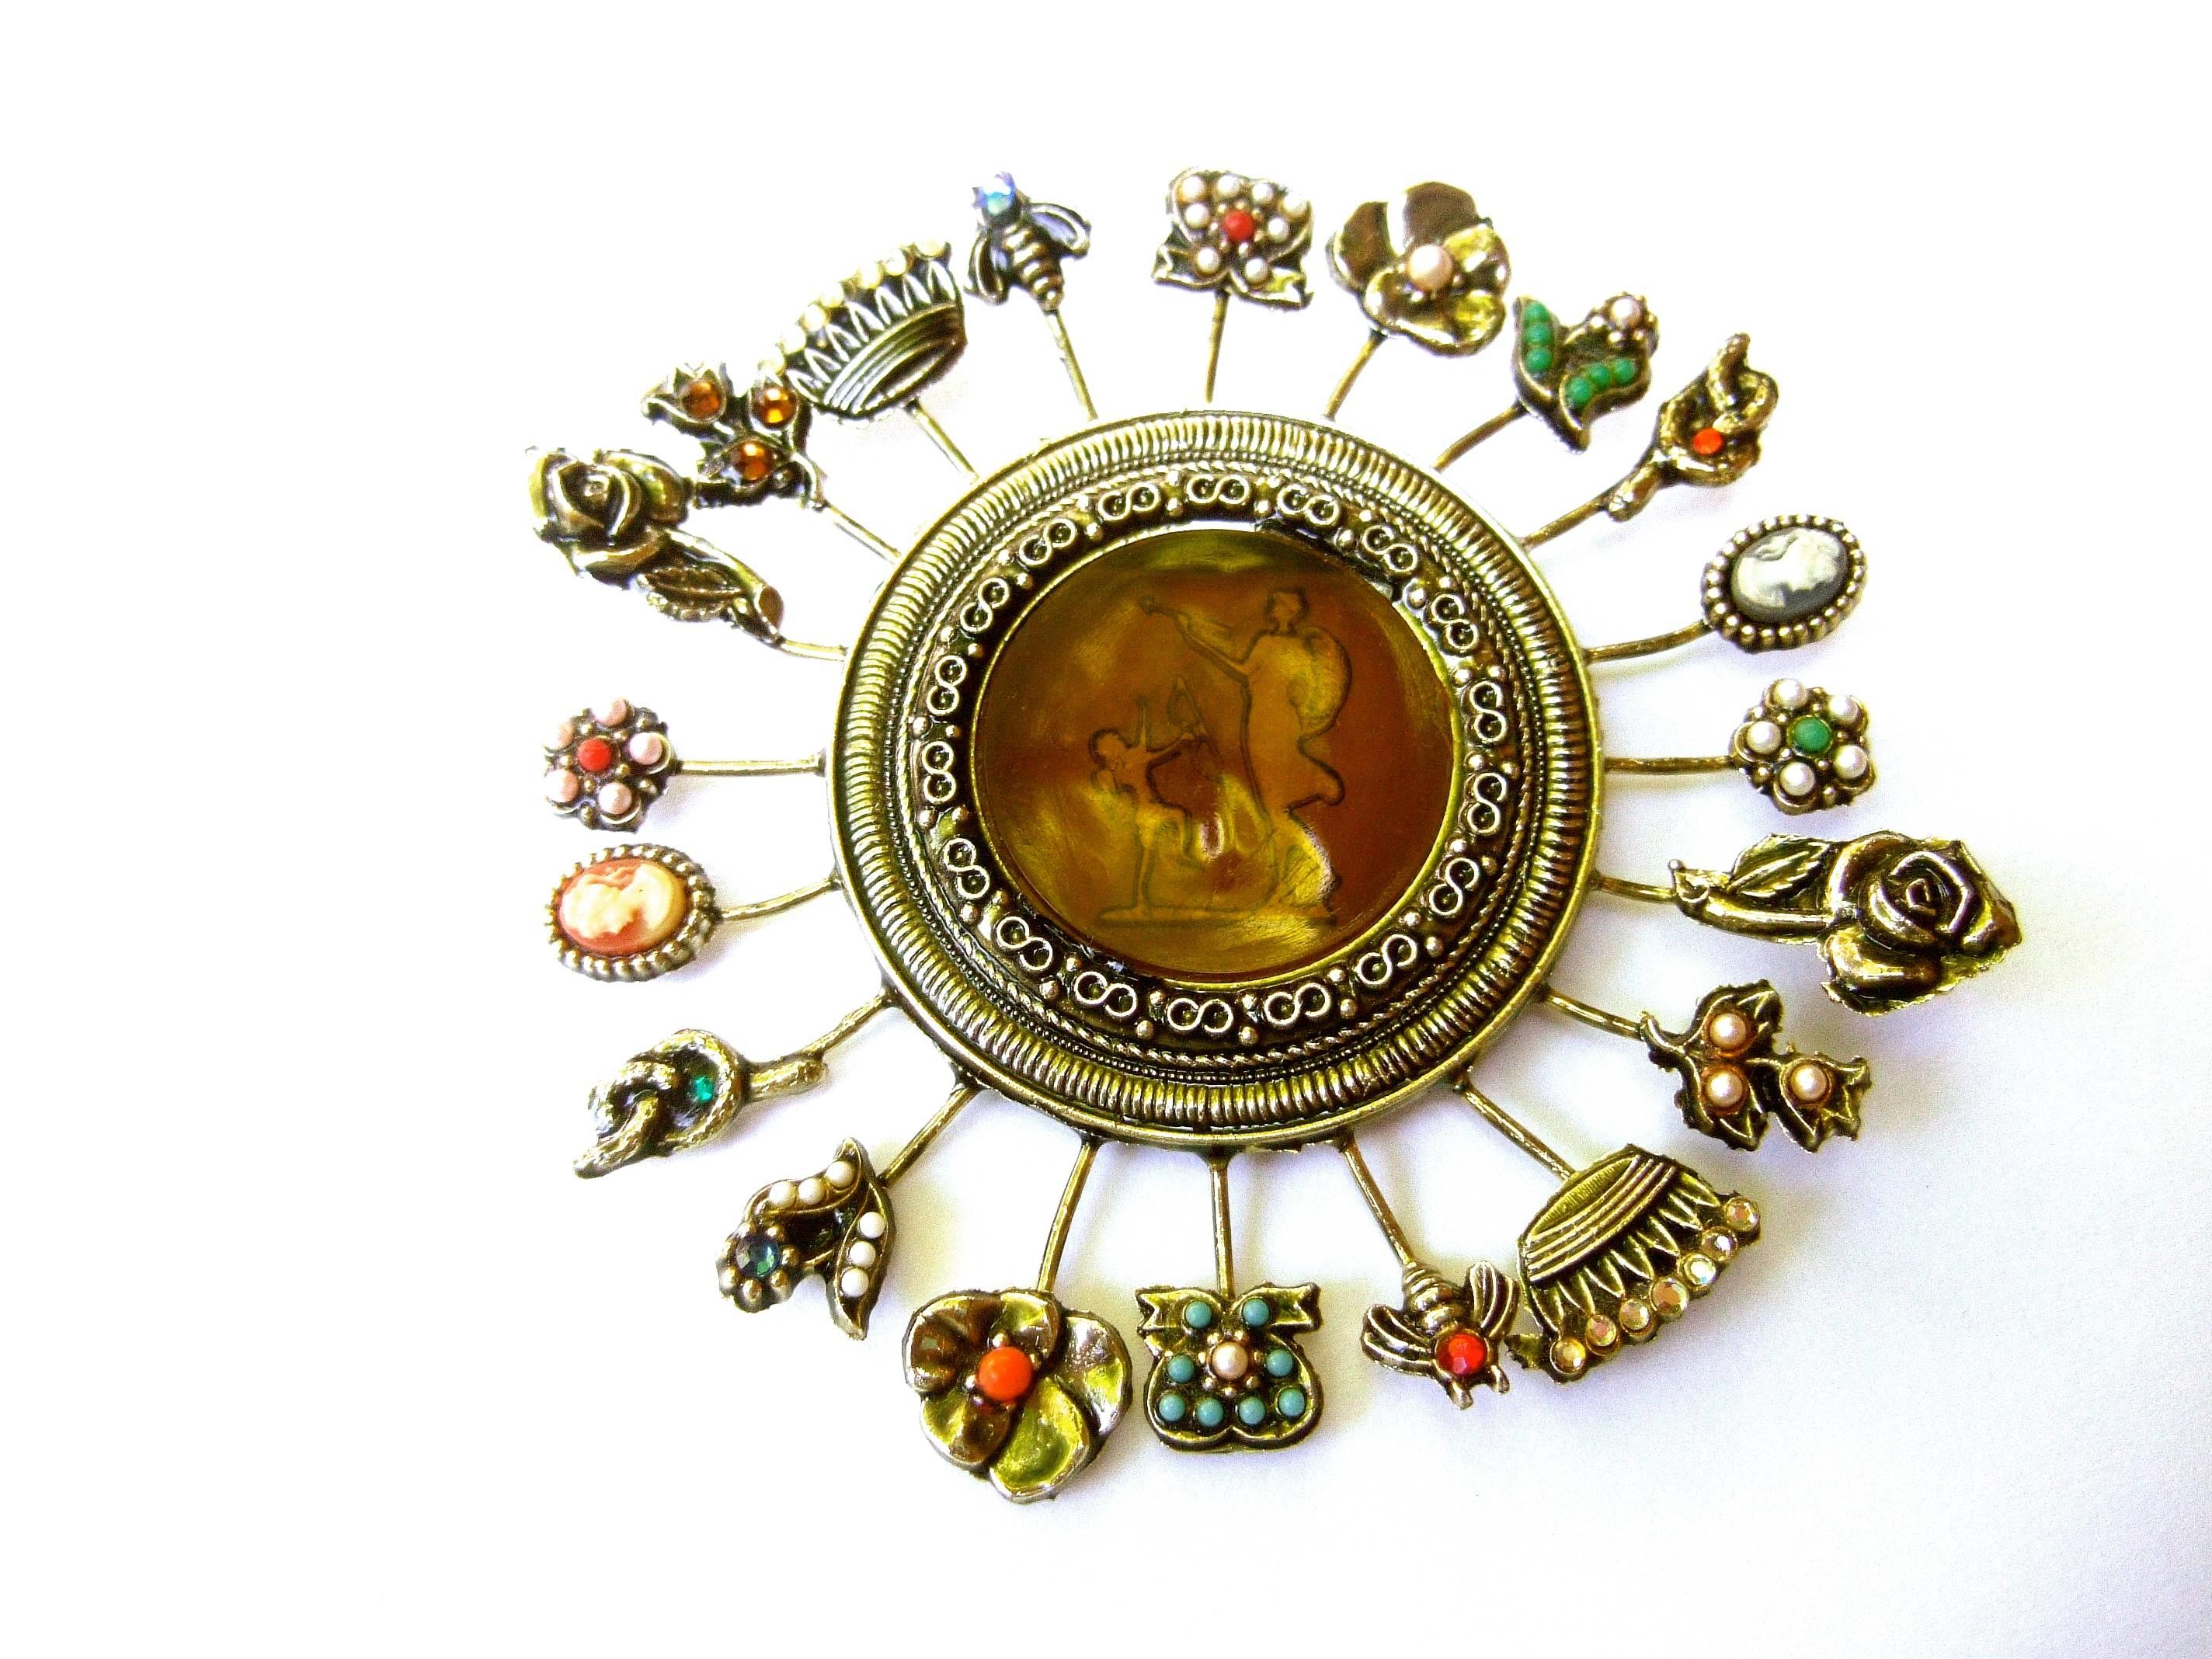 Massive circular medallion lucite intaglio brooch c 1970s
The unique large-scale brooch is designed with a collection
of tiny charm medallions; crowns, flowers bees, serpents and 
cameo silhouettes. The tiny medallions are embellished 
with glass